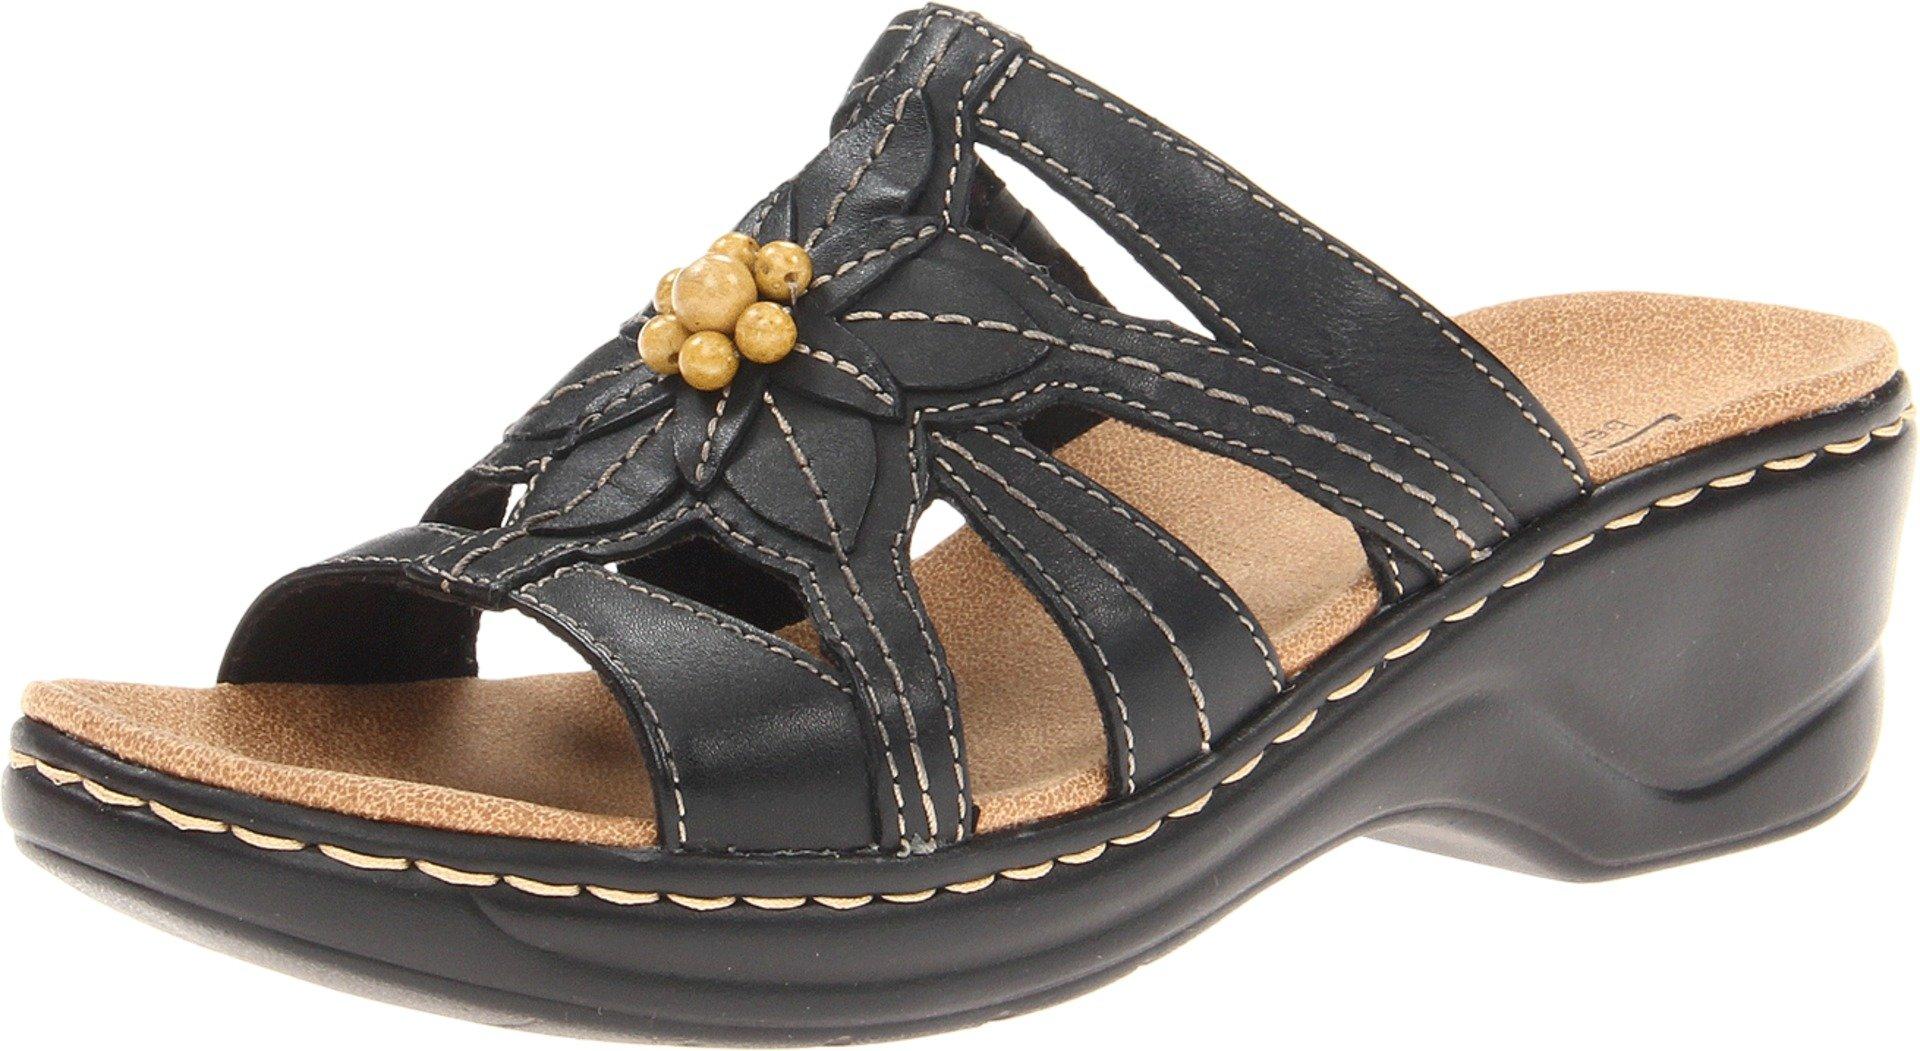 NEW Clarks Leather Slides with Bead Detail Lexi Myrtle Brown Multi